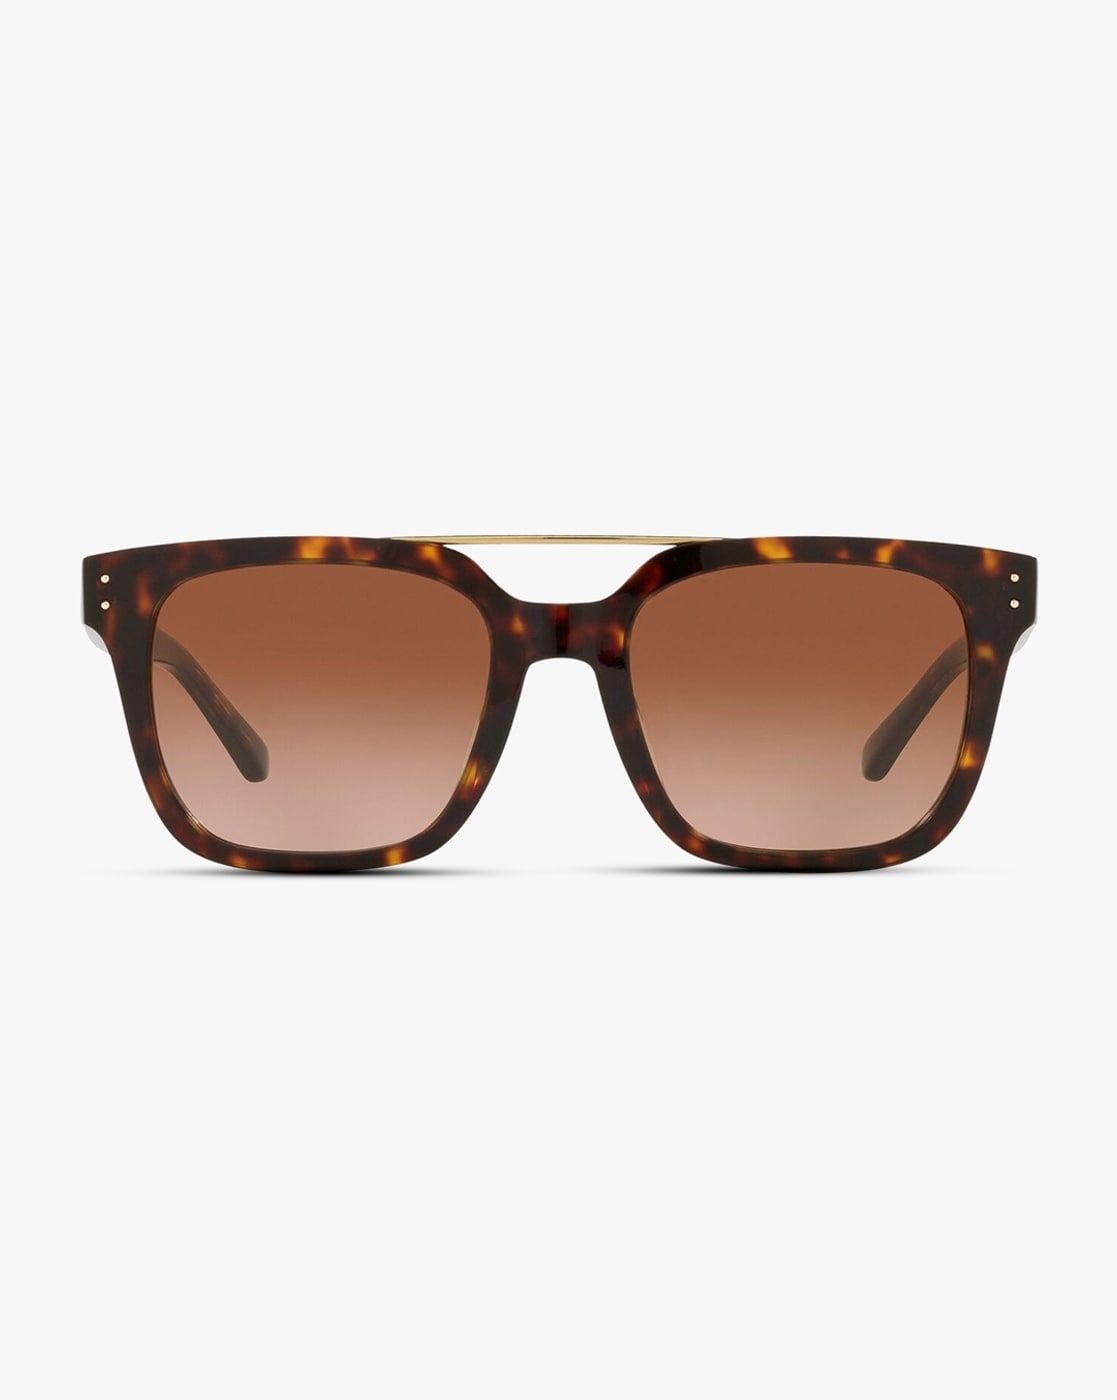 Buy Brown Sunglasses for Women by Tory Burch Online 